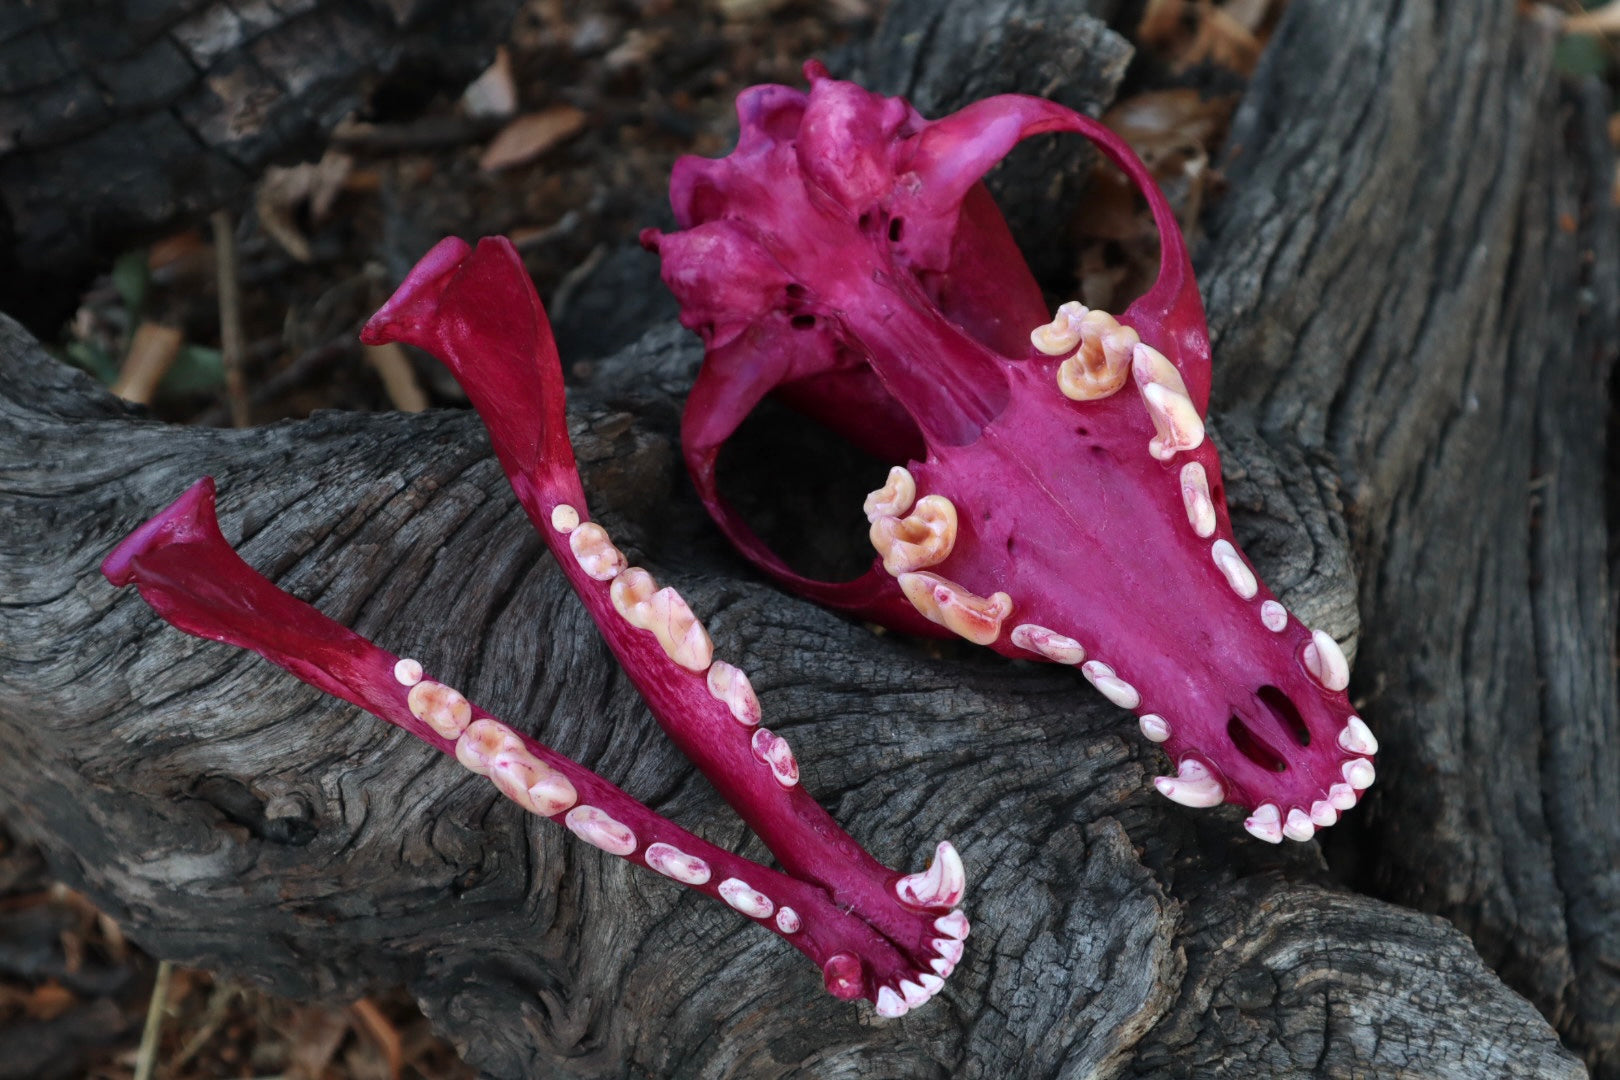 Reserved for Denise - Naturally Stained Coyote Skull